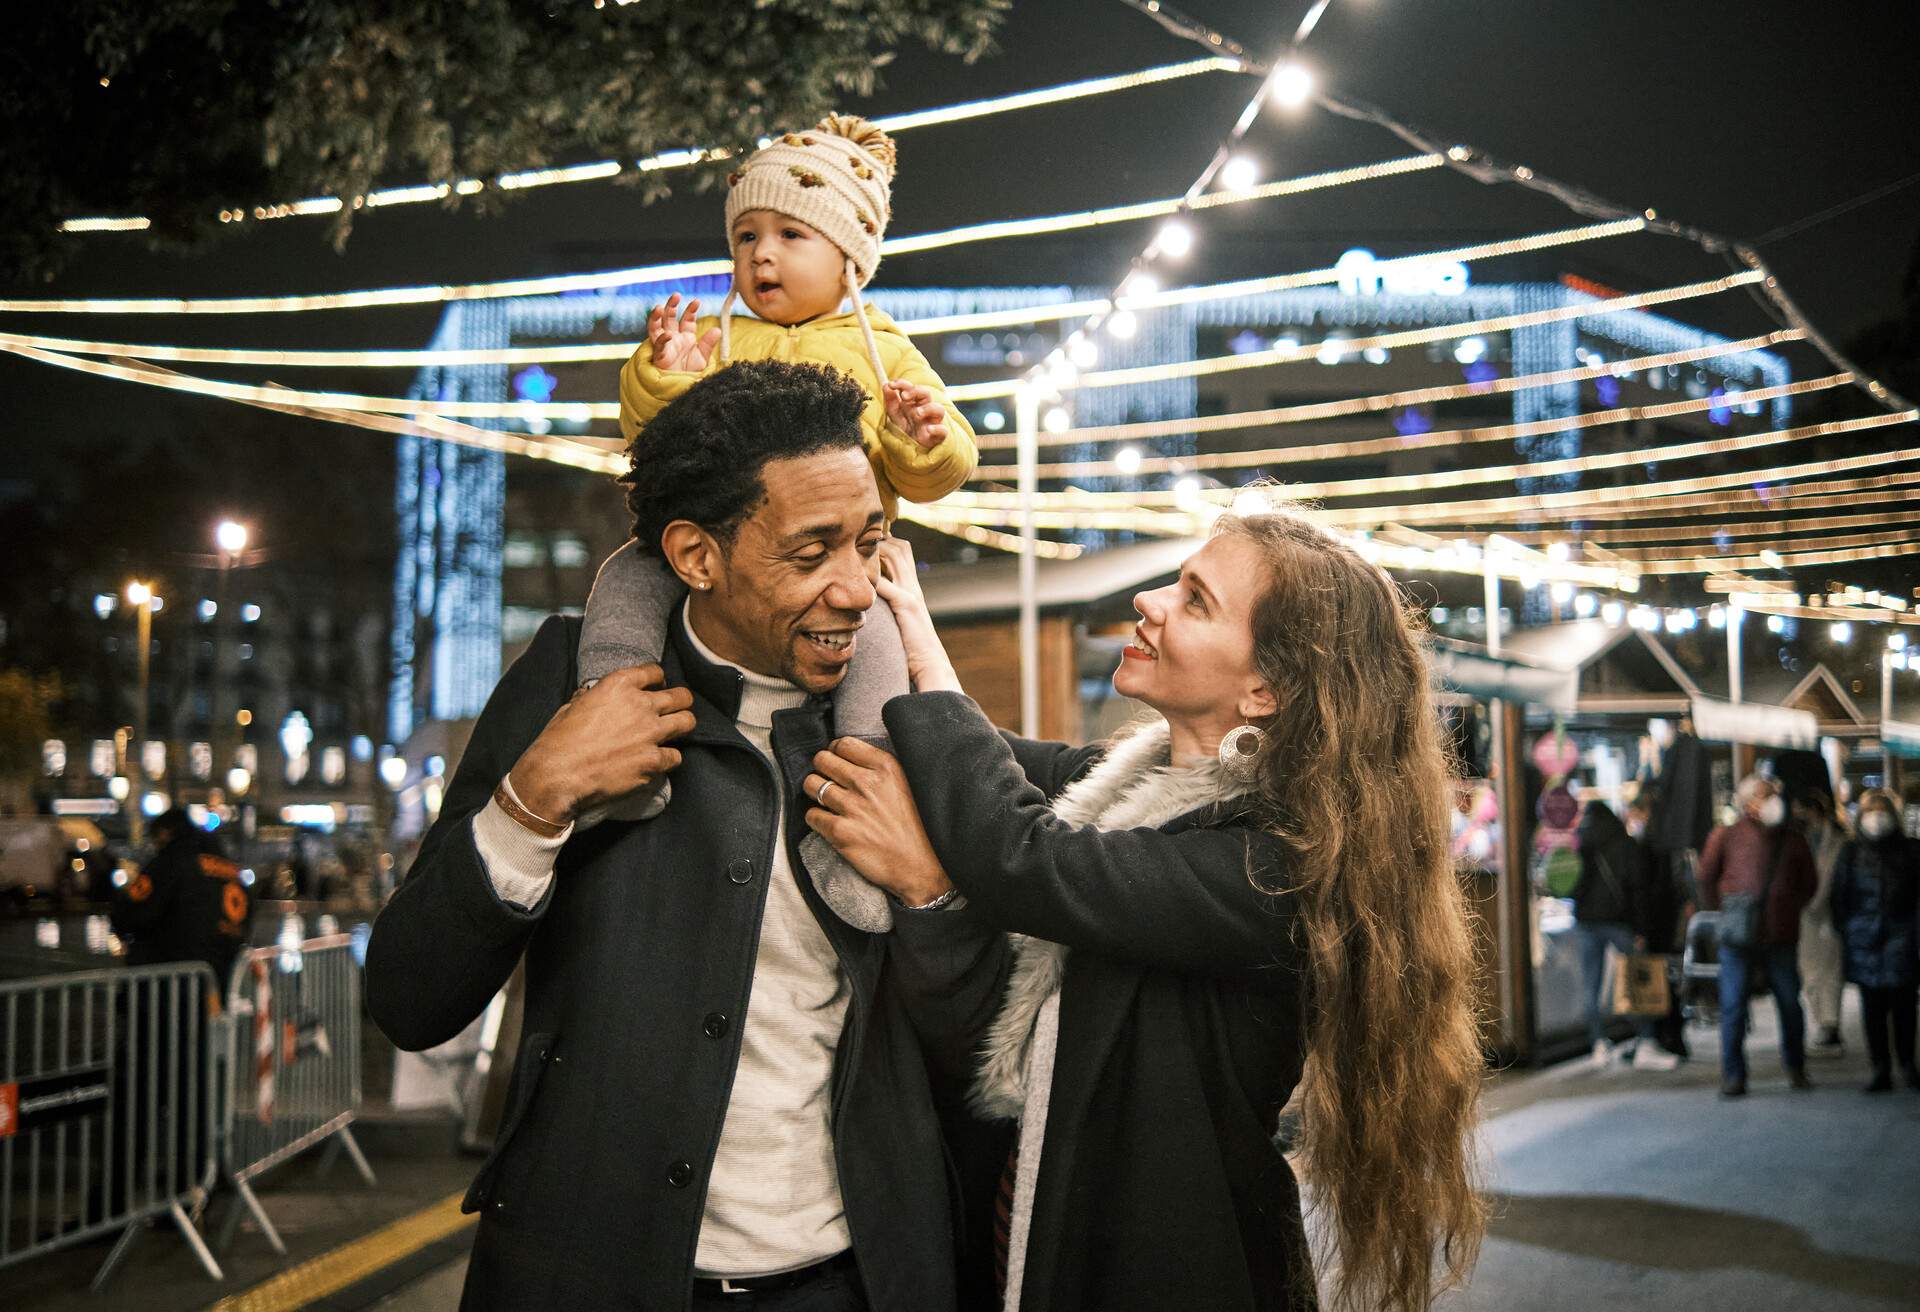 A father with a child on his shoulders and a smiling mother looking at her baby in front of a brightly lit Christmas market.